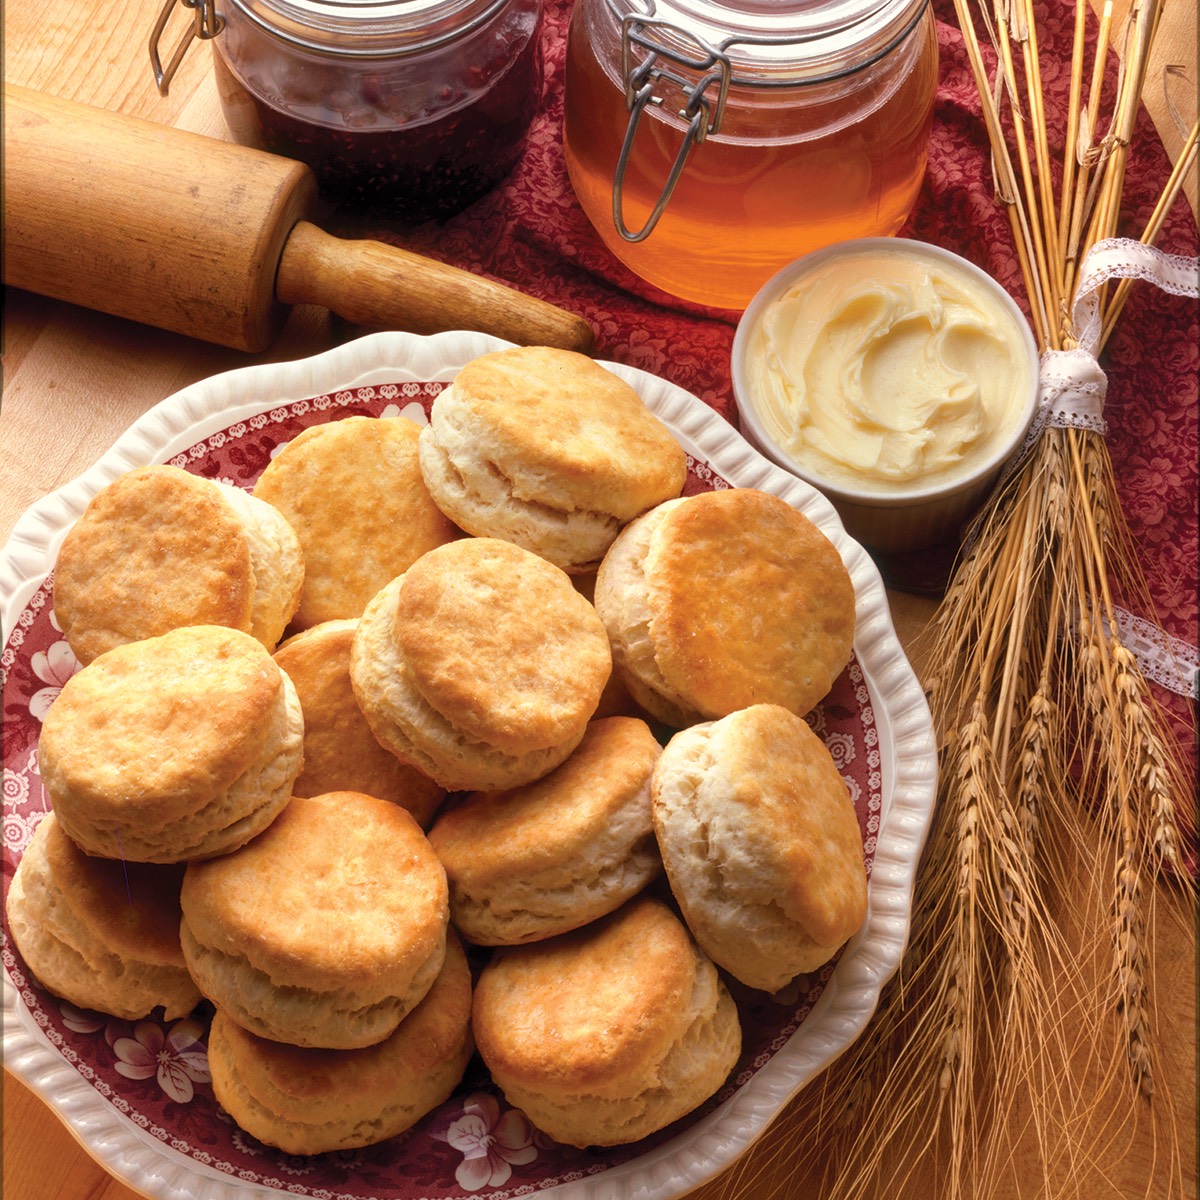 biscuits on a plate with butter and jam